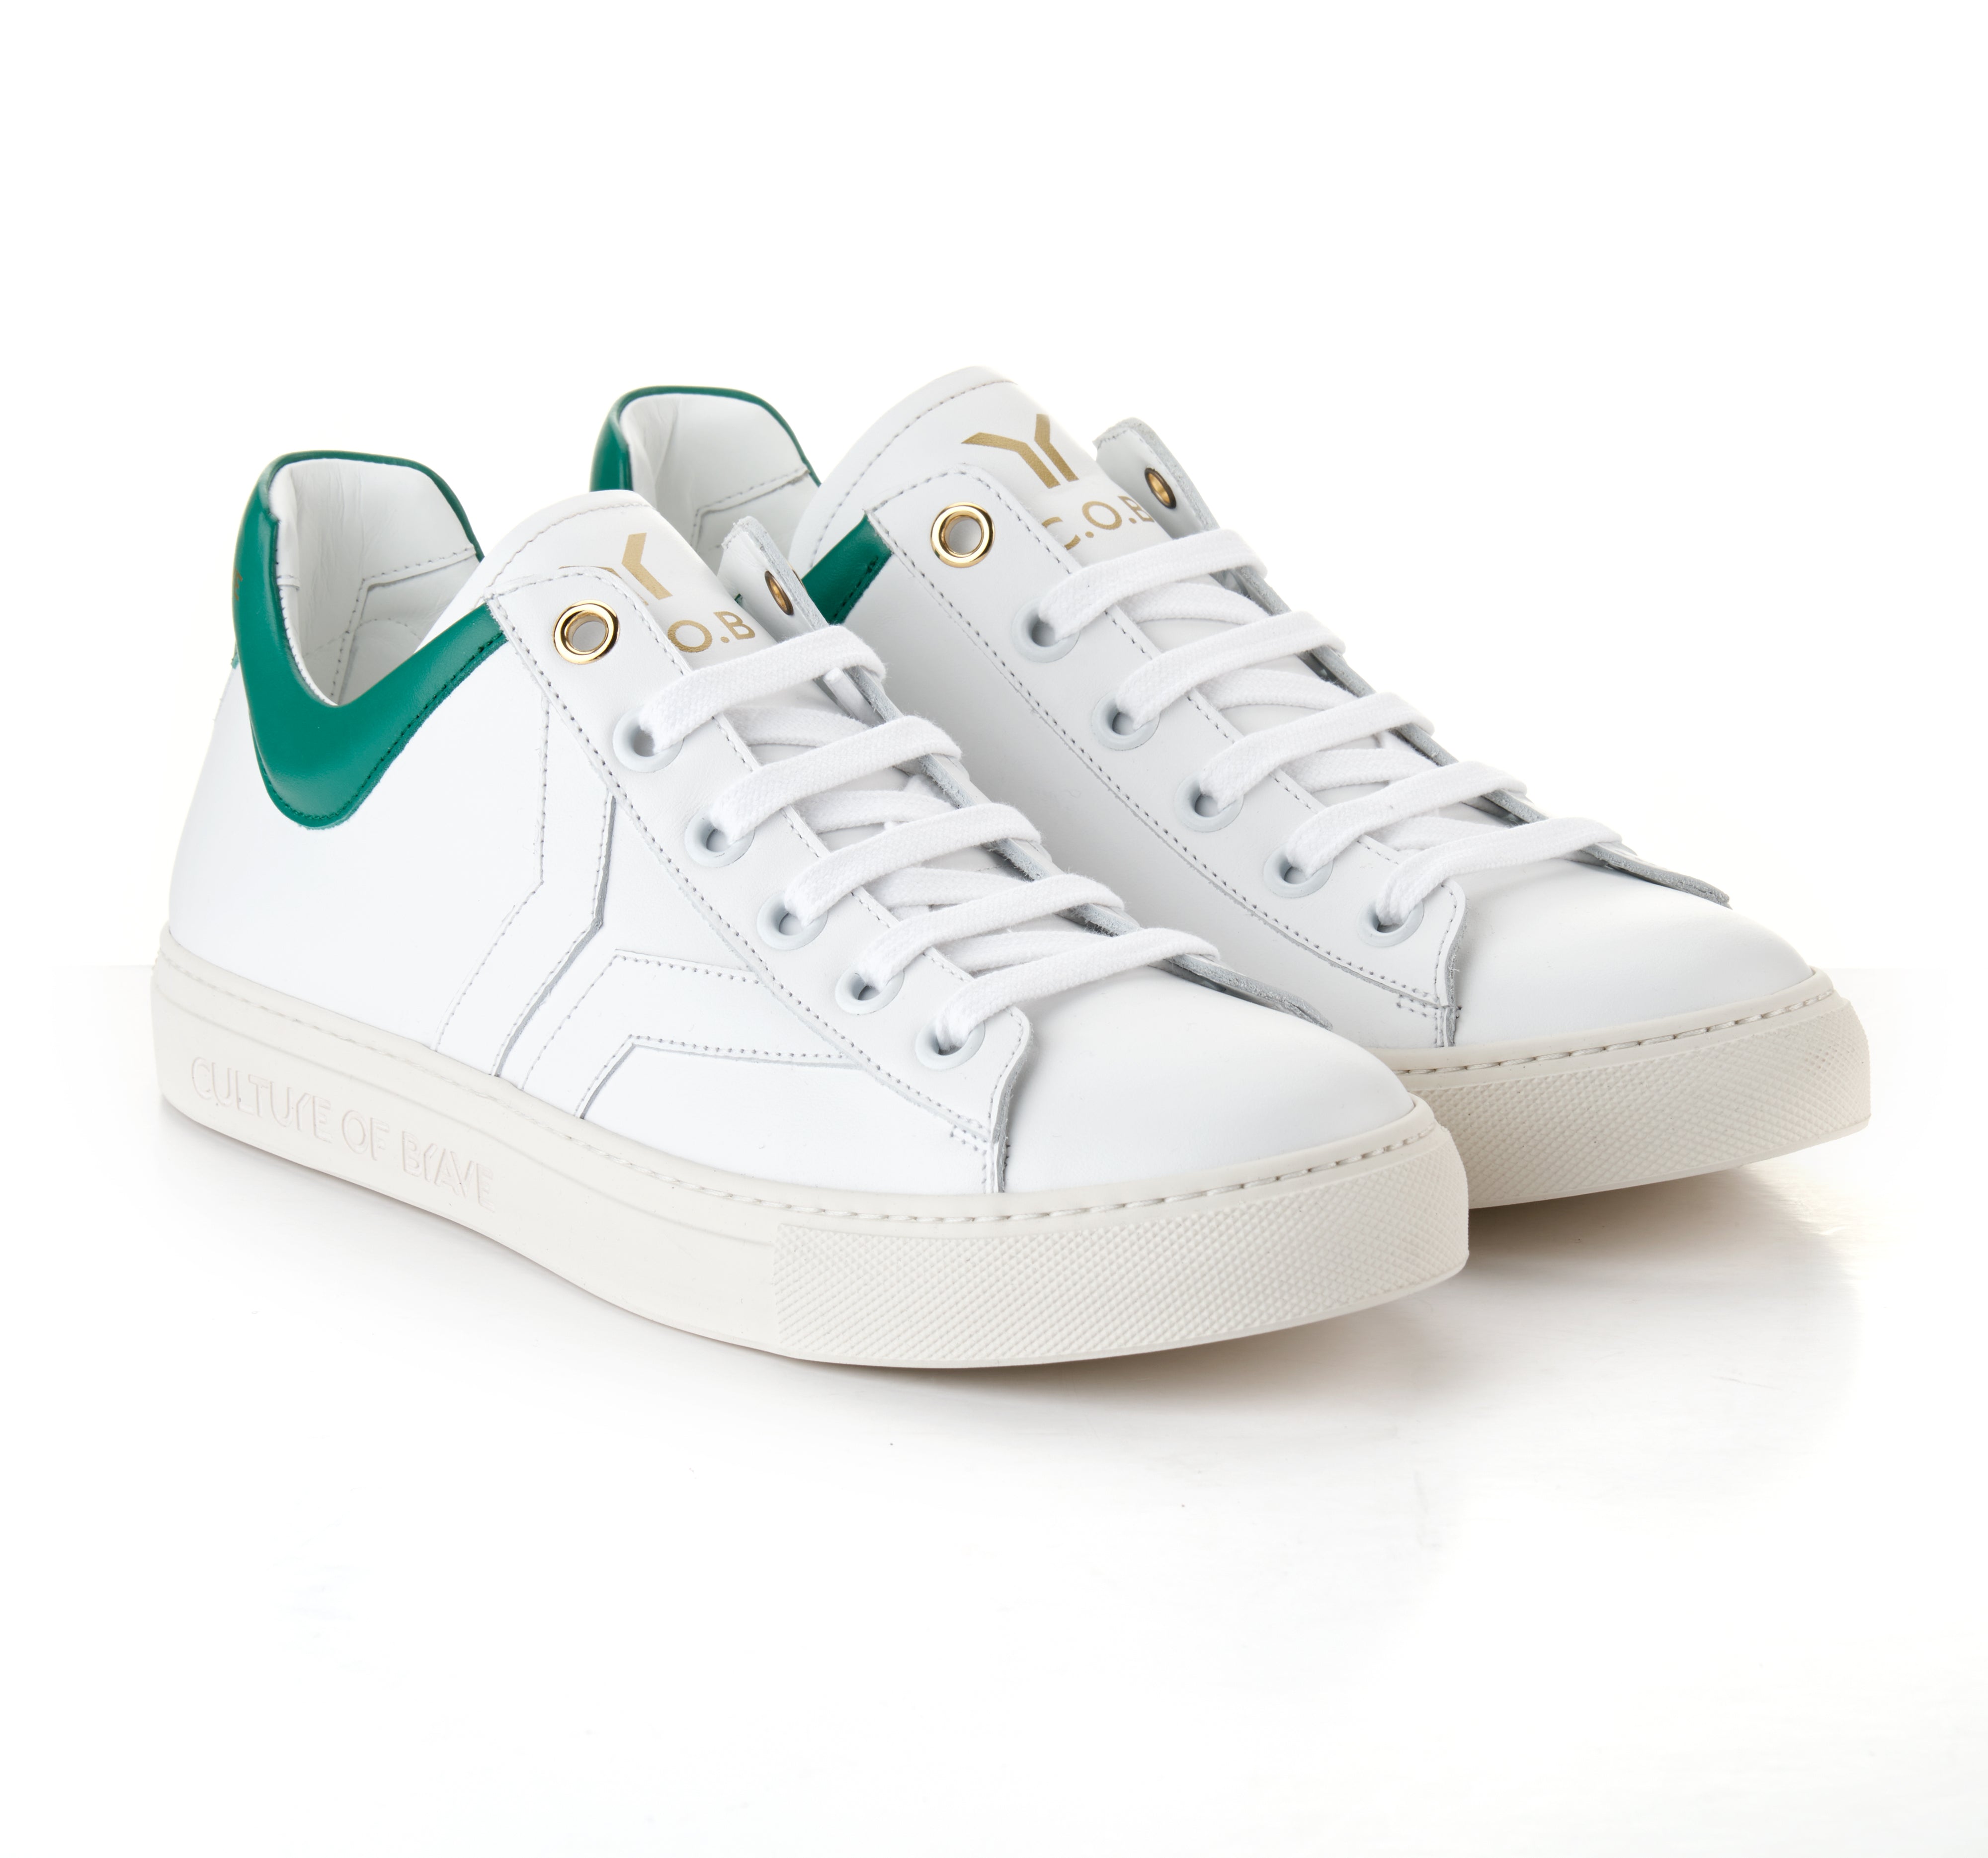 Courage S27 Men White leather green ankle low cut